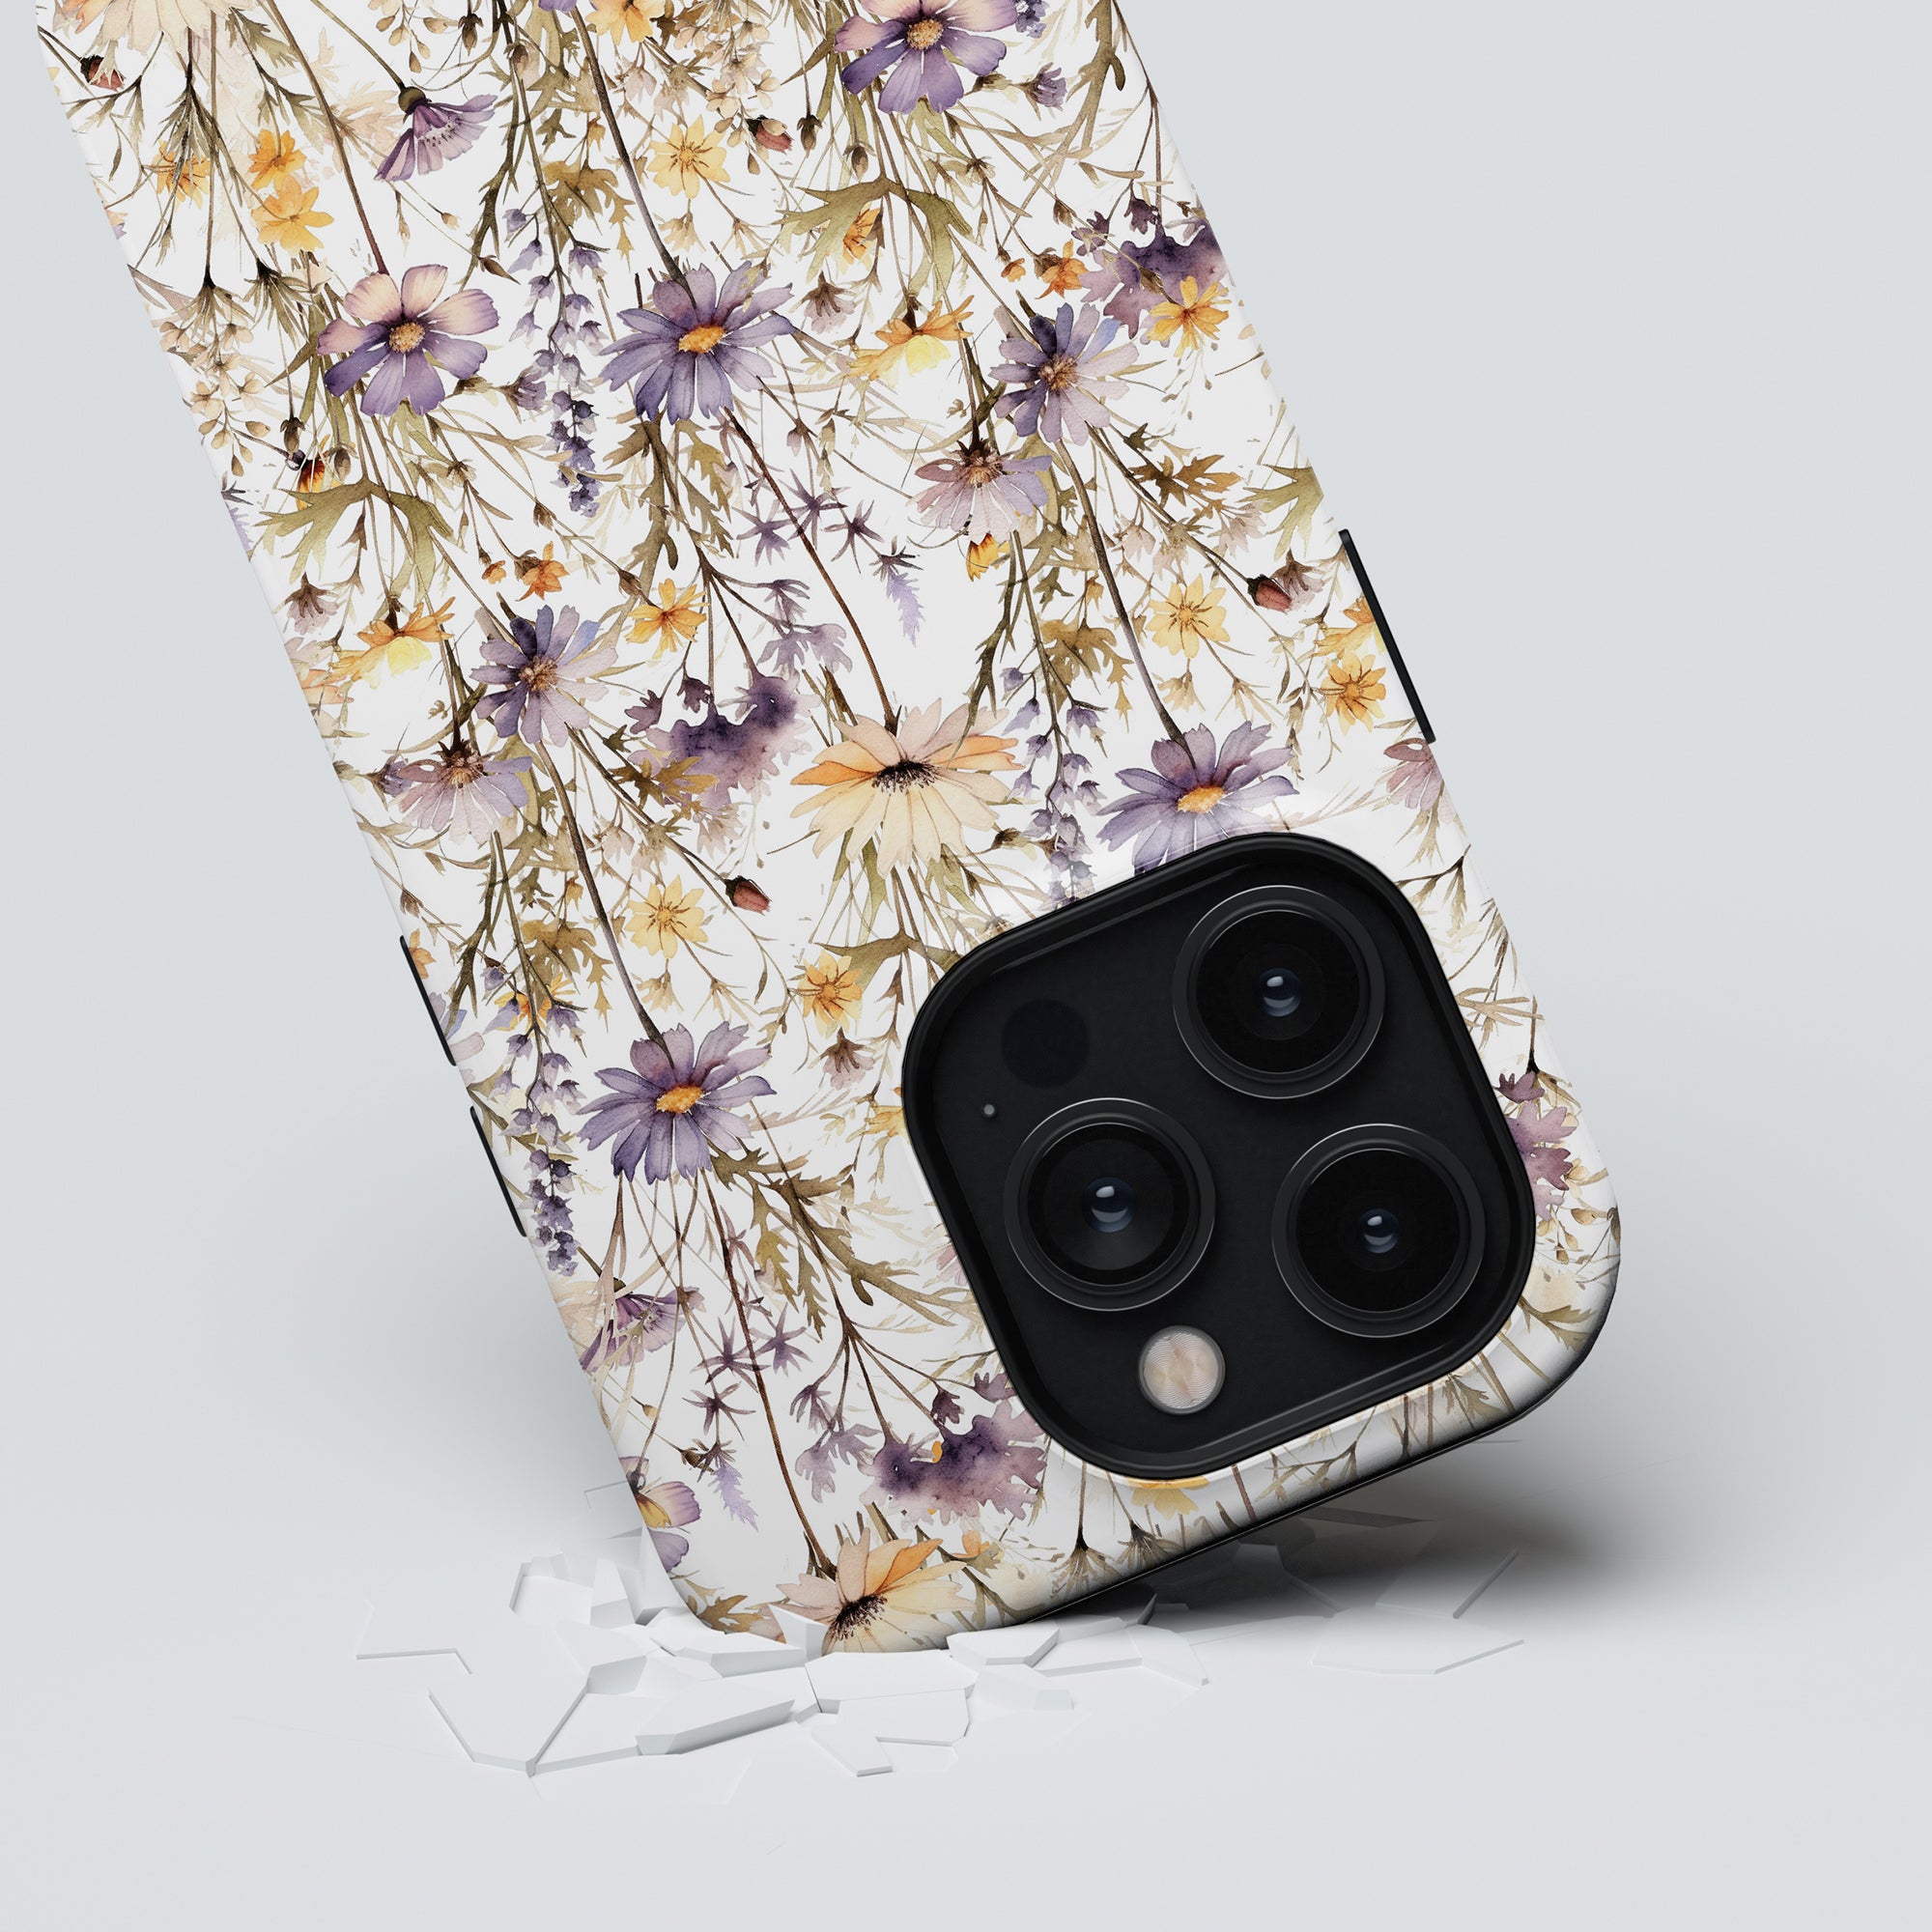 A smartphone with a Purple Wildflower - Tough Case rests on a surface, next to a few scattered white pieces.